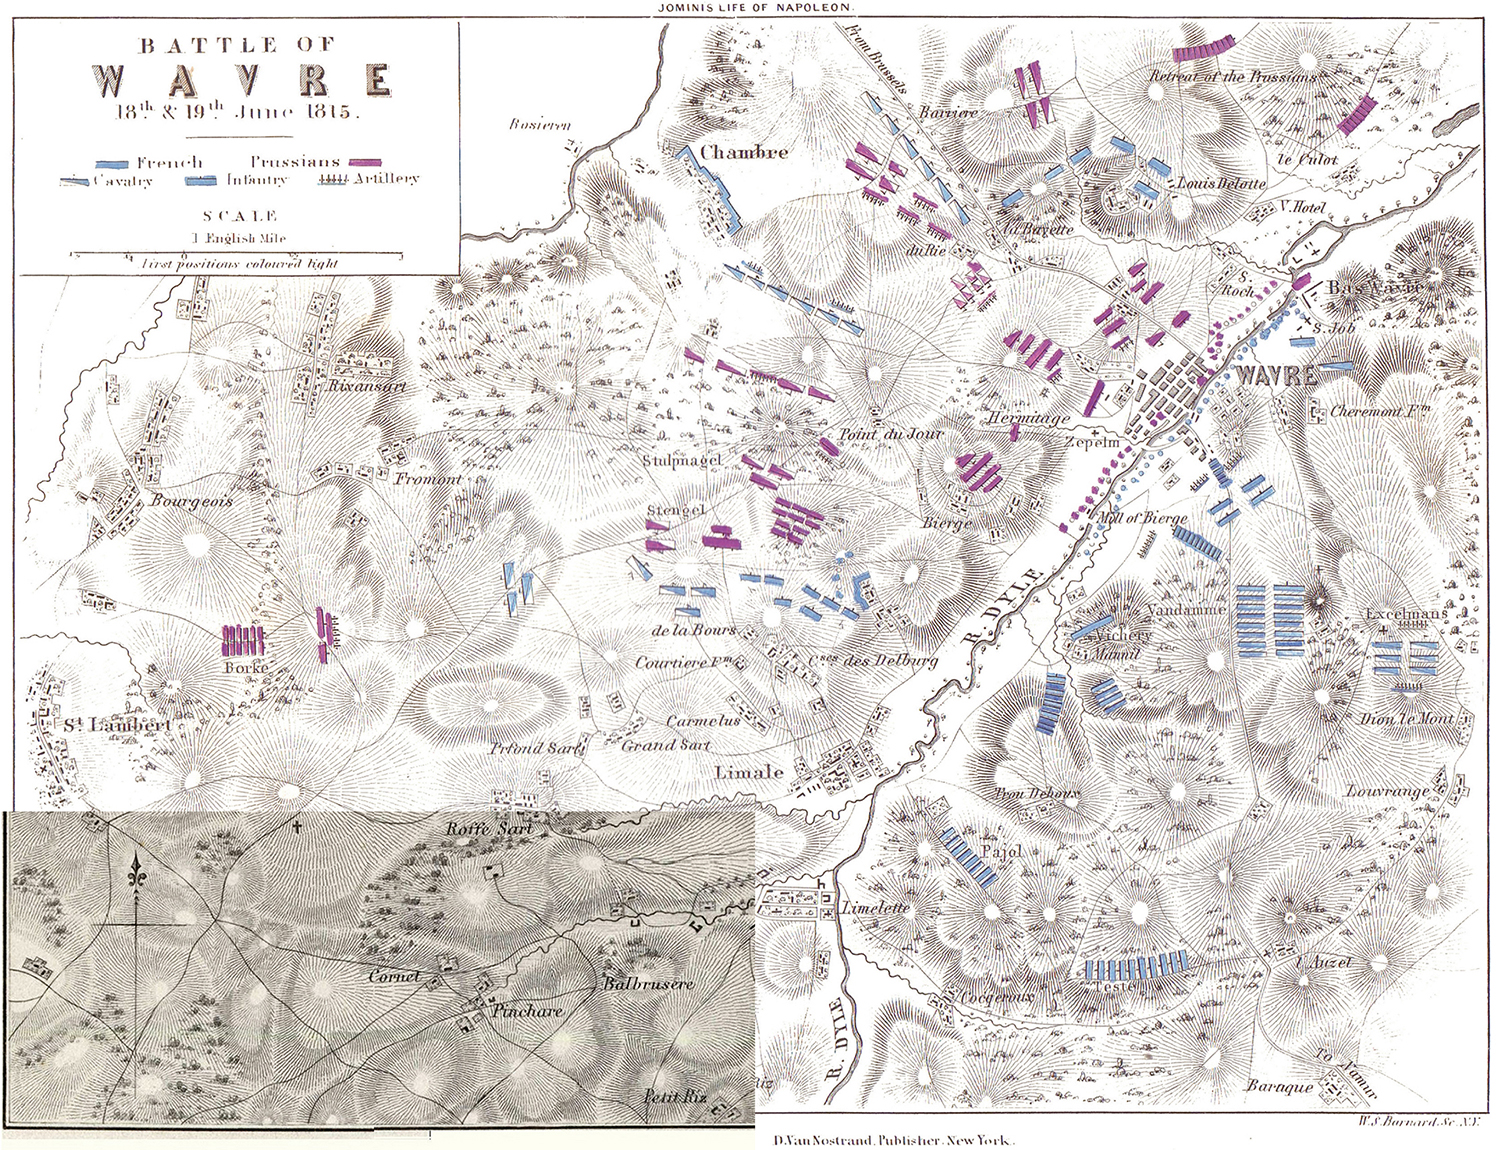 Map of the Napoleonic Wars: the Battle of Wavre - June 18 and 19, 1815